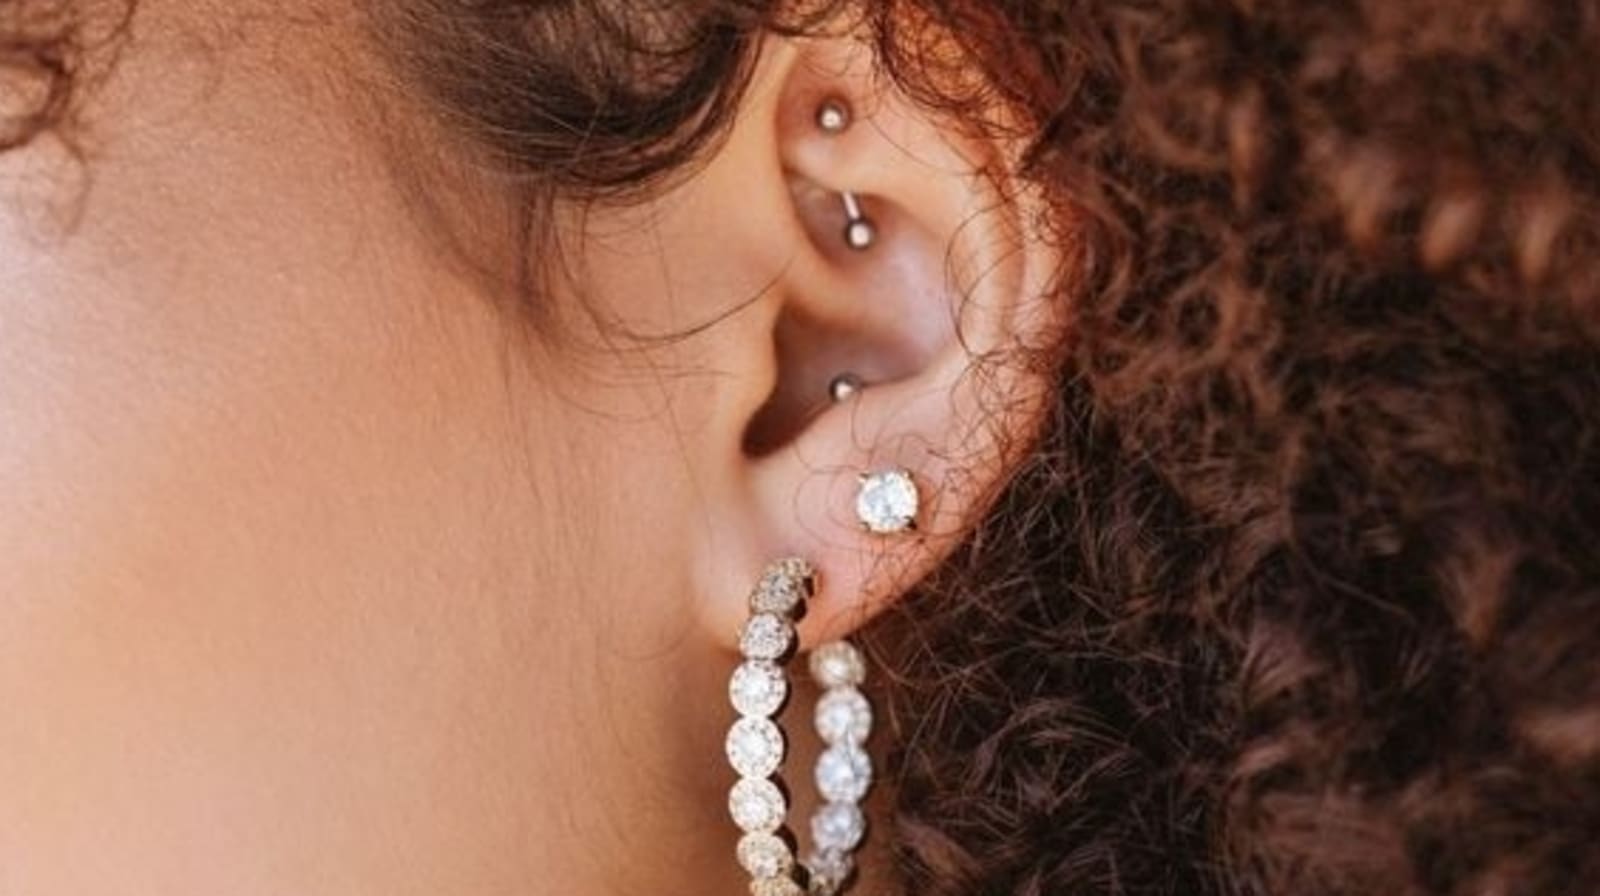 Caring for new piercings